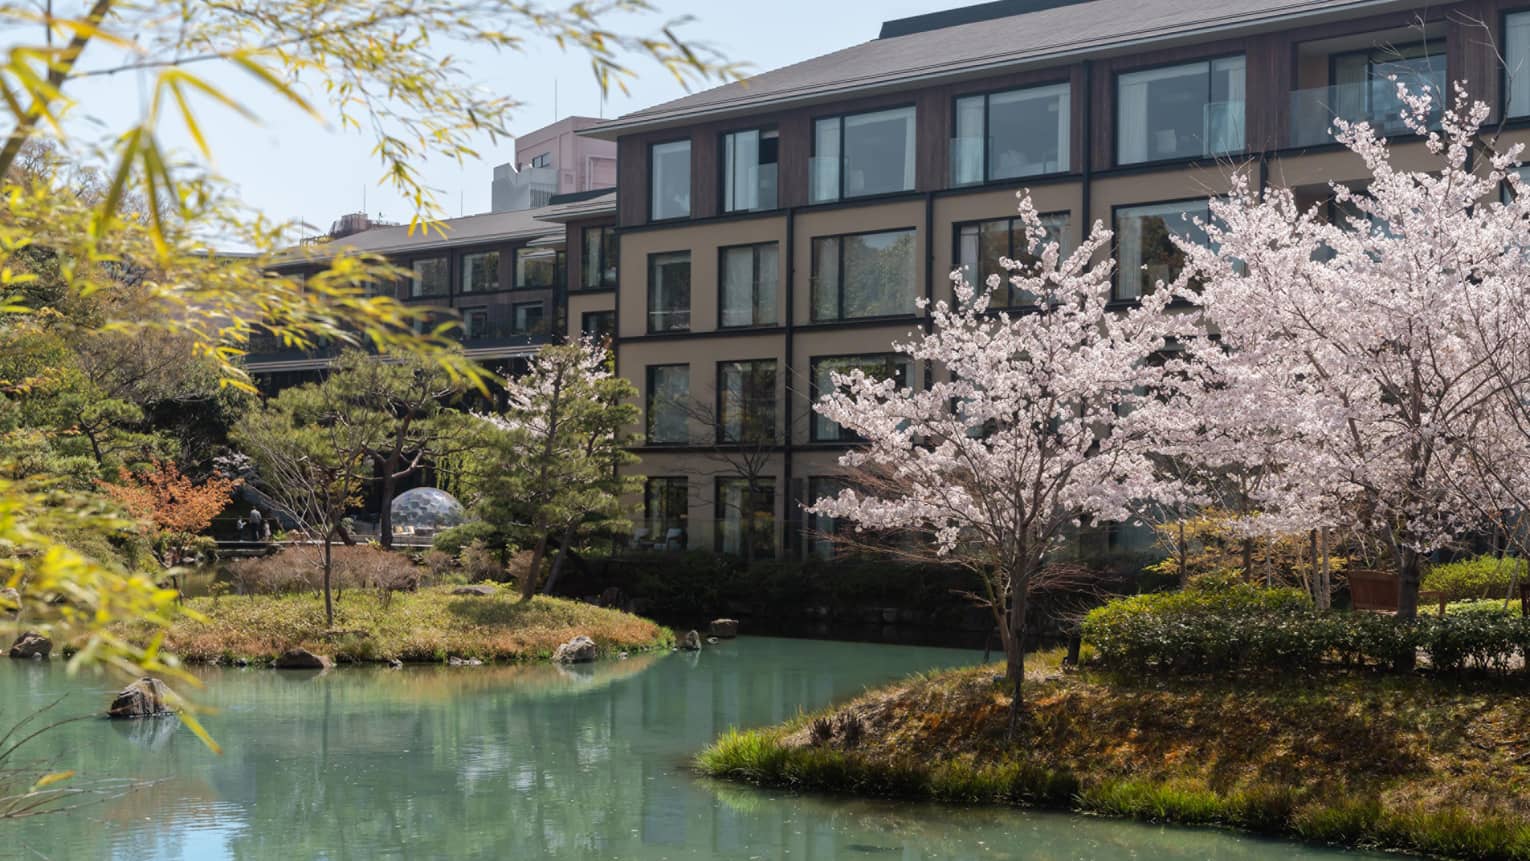 A hotel and pond with cherry blossom trees